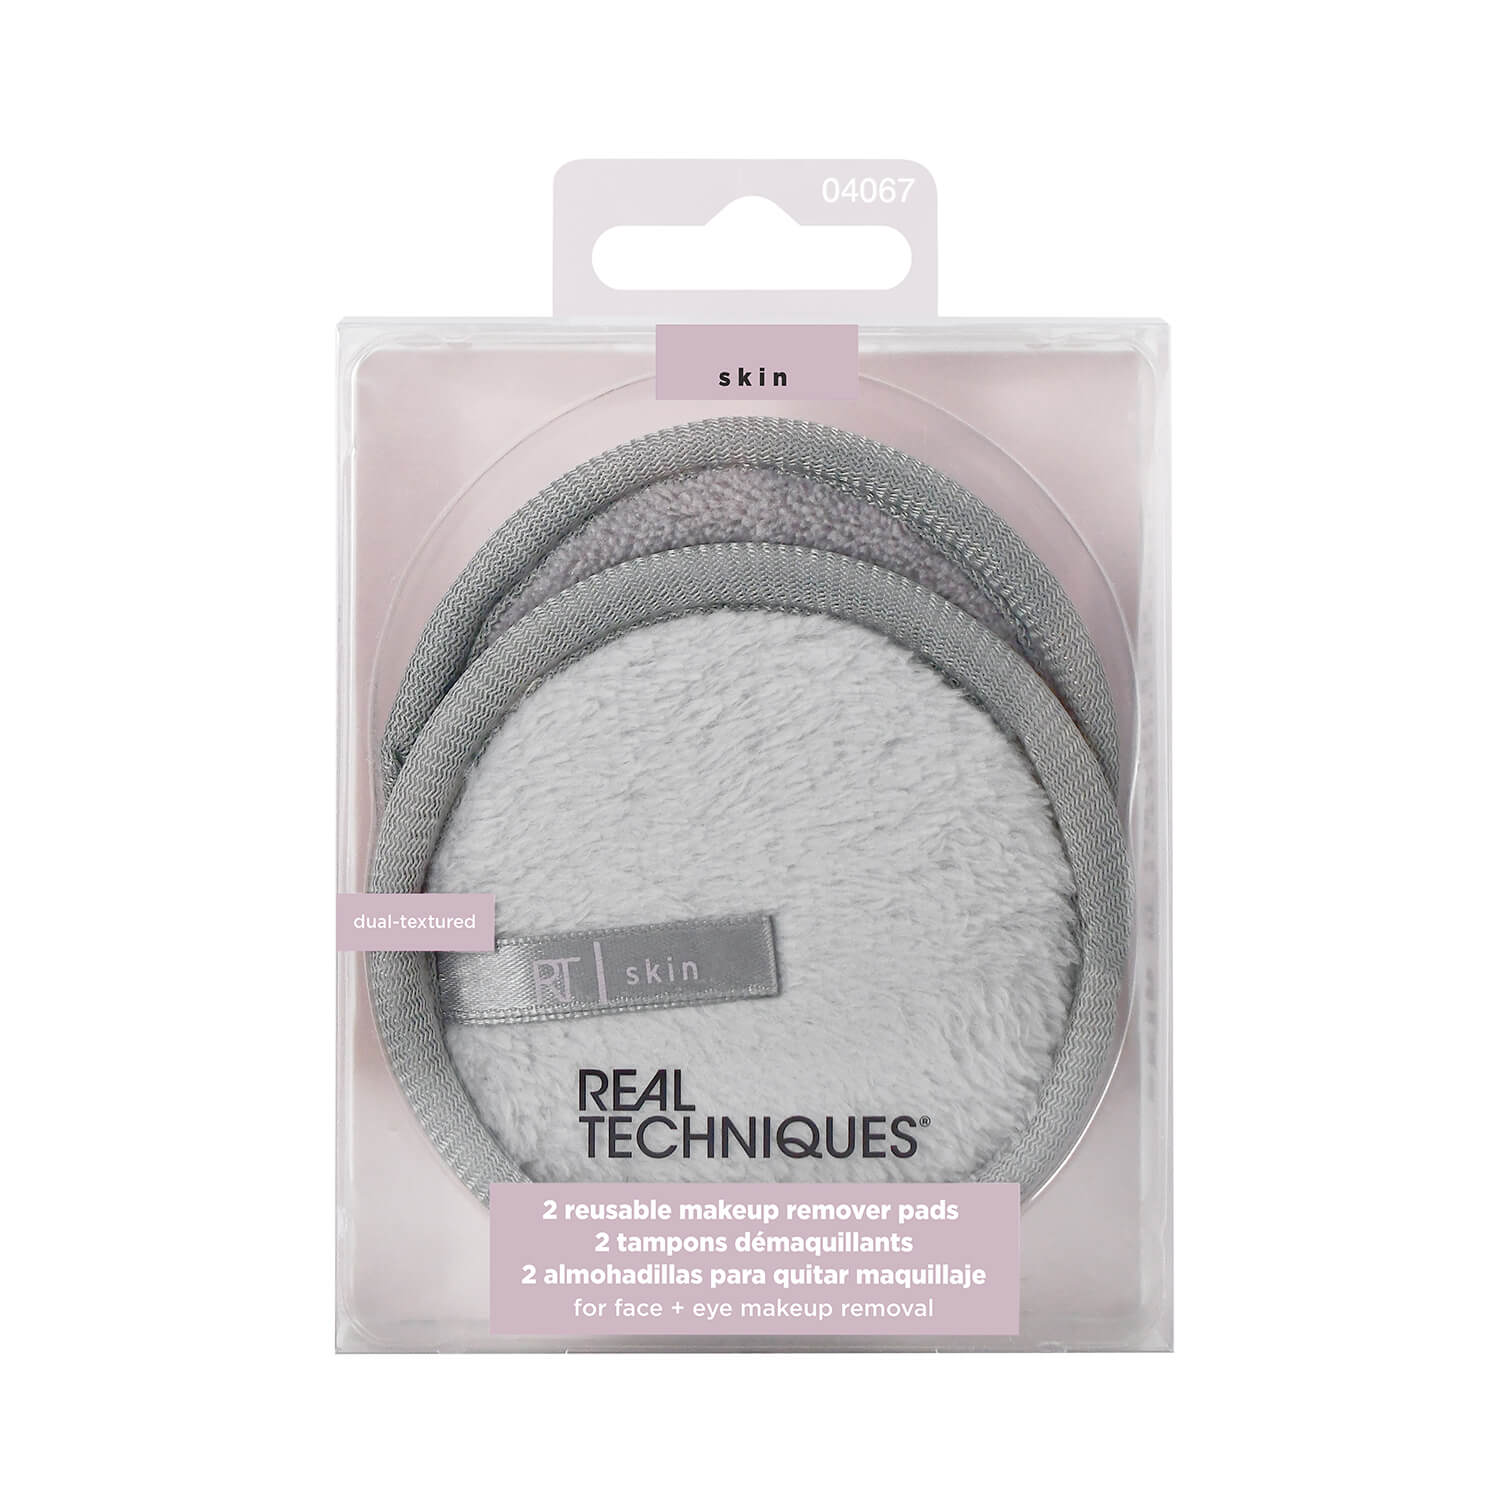 Real Techniques Erase The Day Make Up Remover Duo 1 Shaws Department Stores